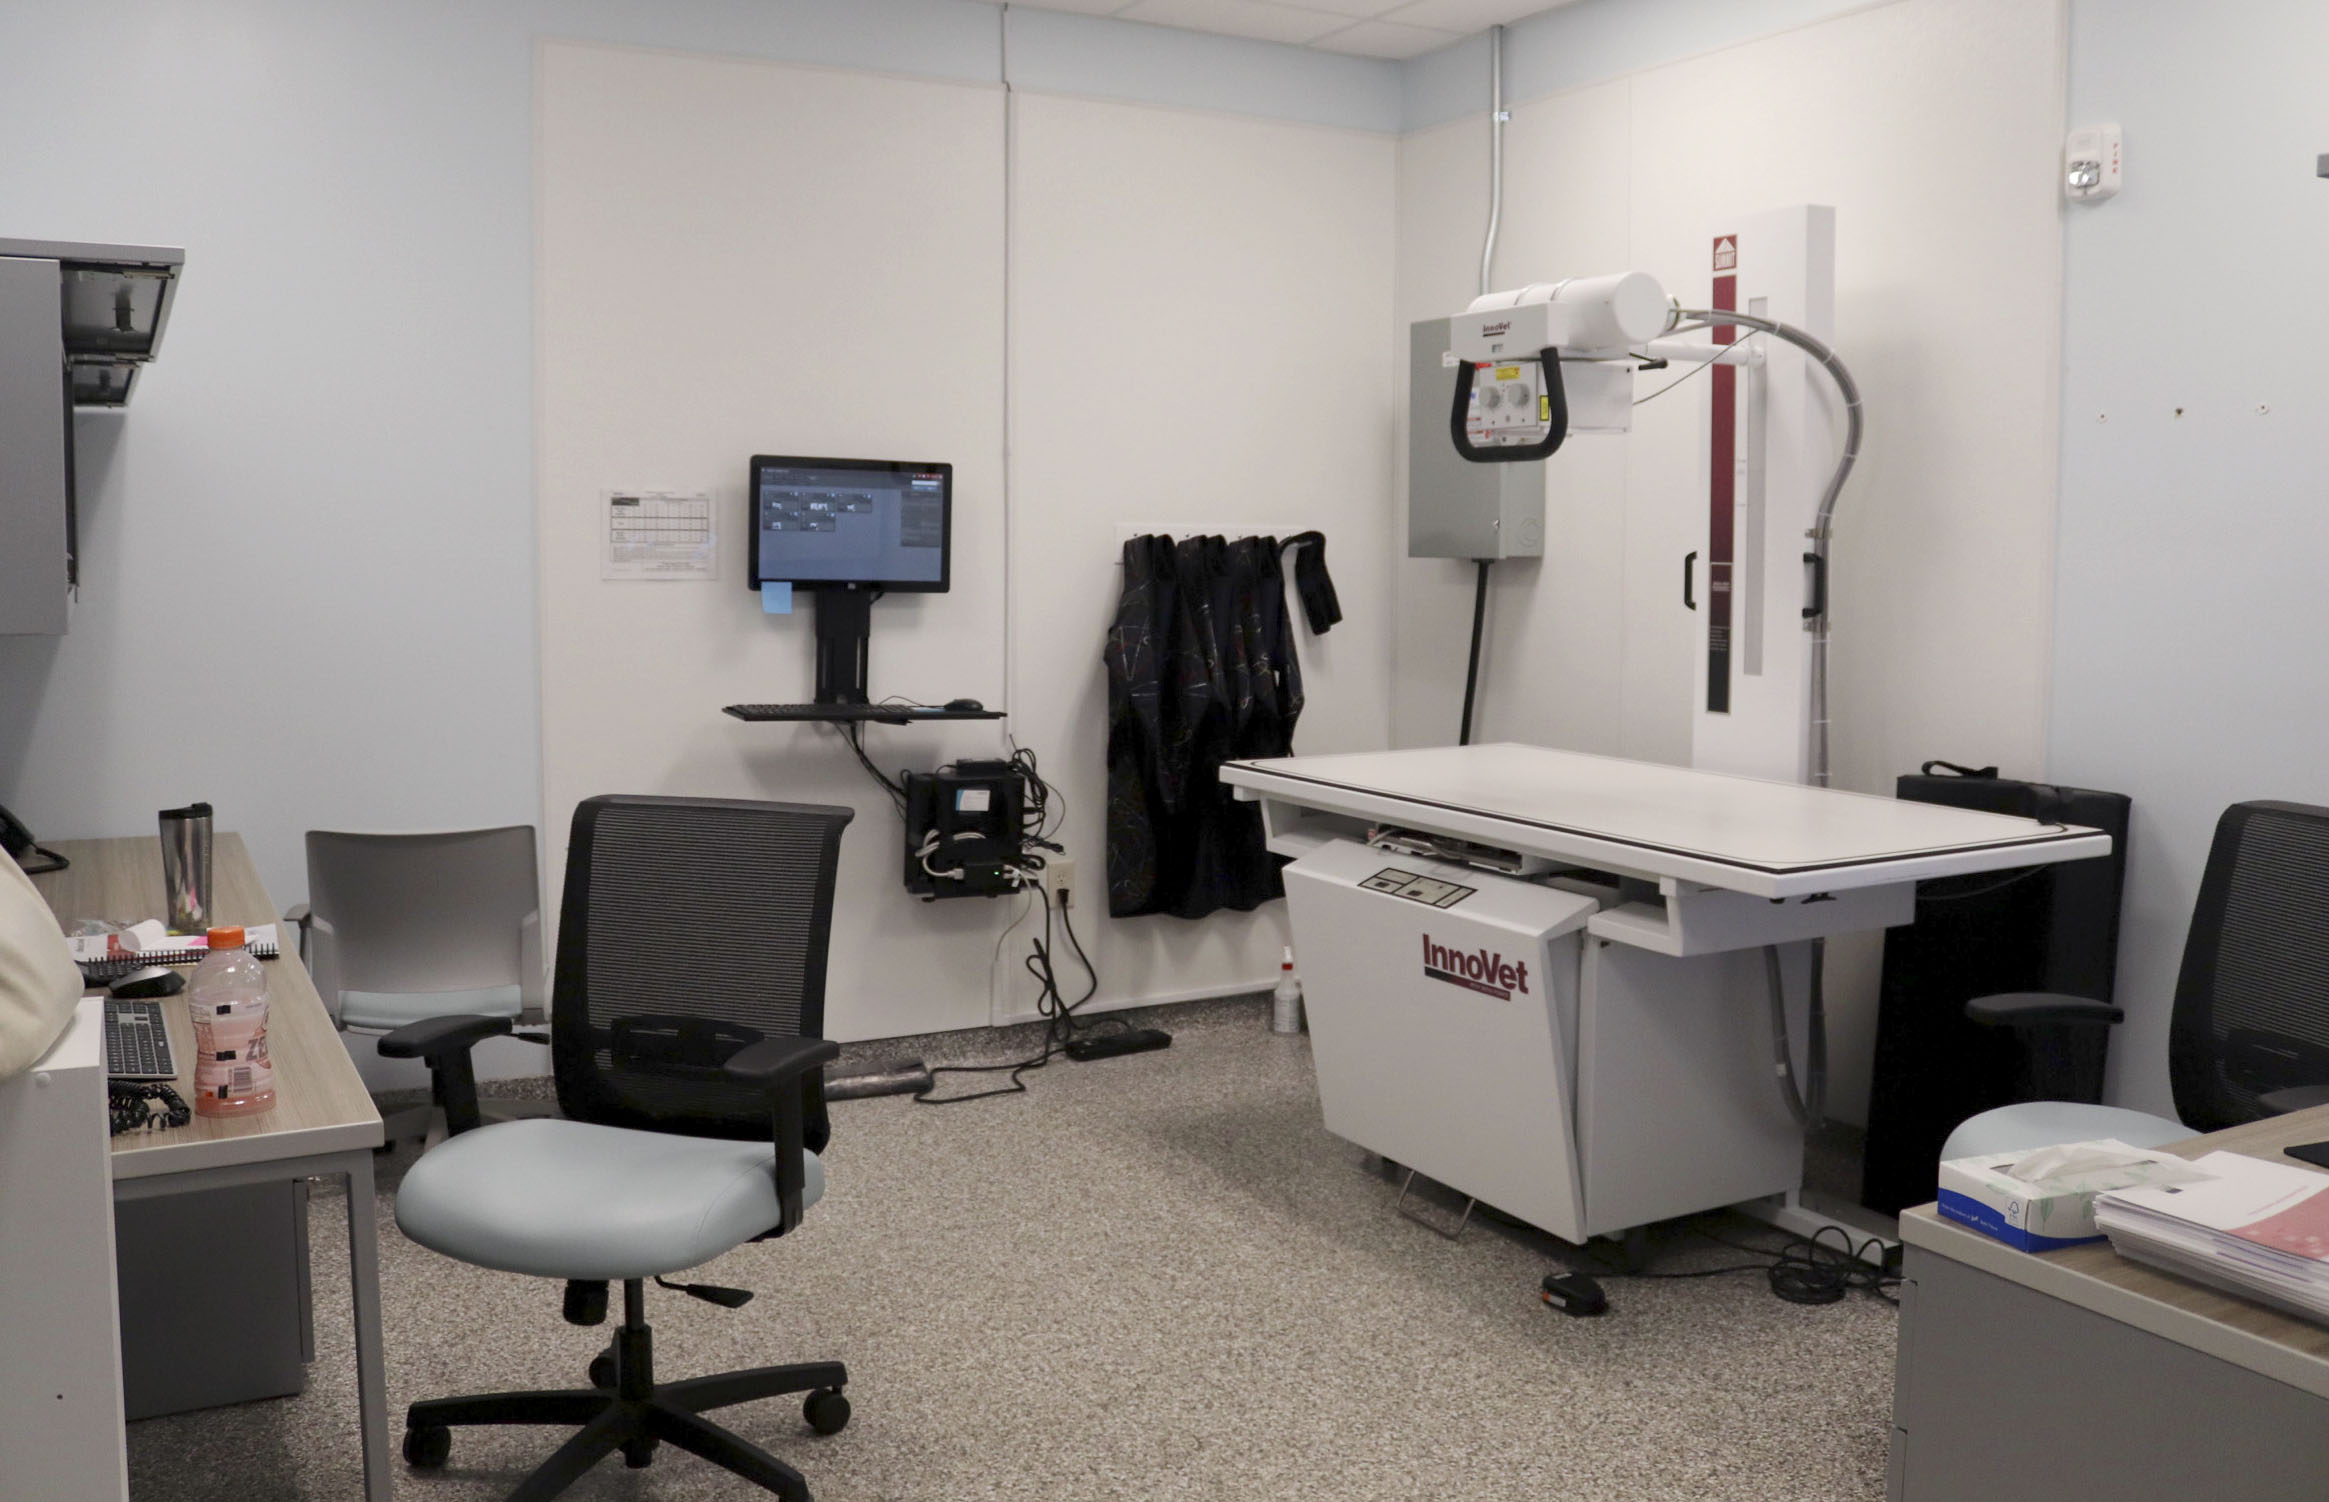 An examination room for x-rays rests on Tuesday, Aug. 23, 2022, at Charles and Lynn Zhang Animal Care & Resource Center in Kalamazoo.